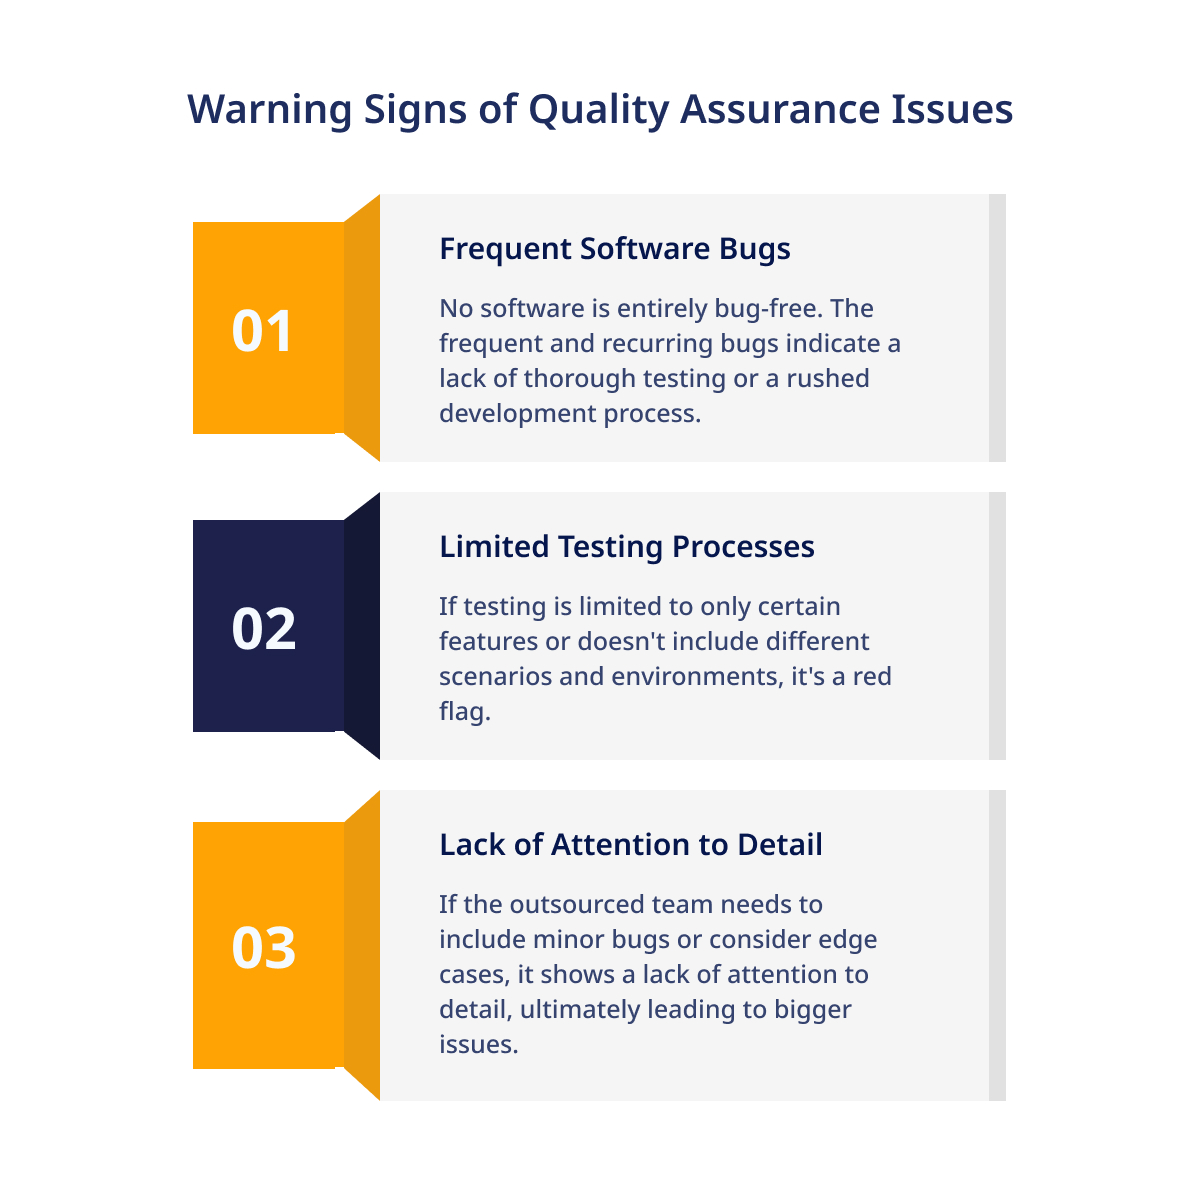 Warning Signs of Quality Assurance Issues